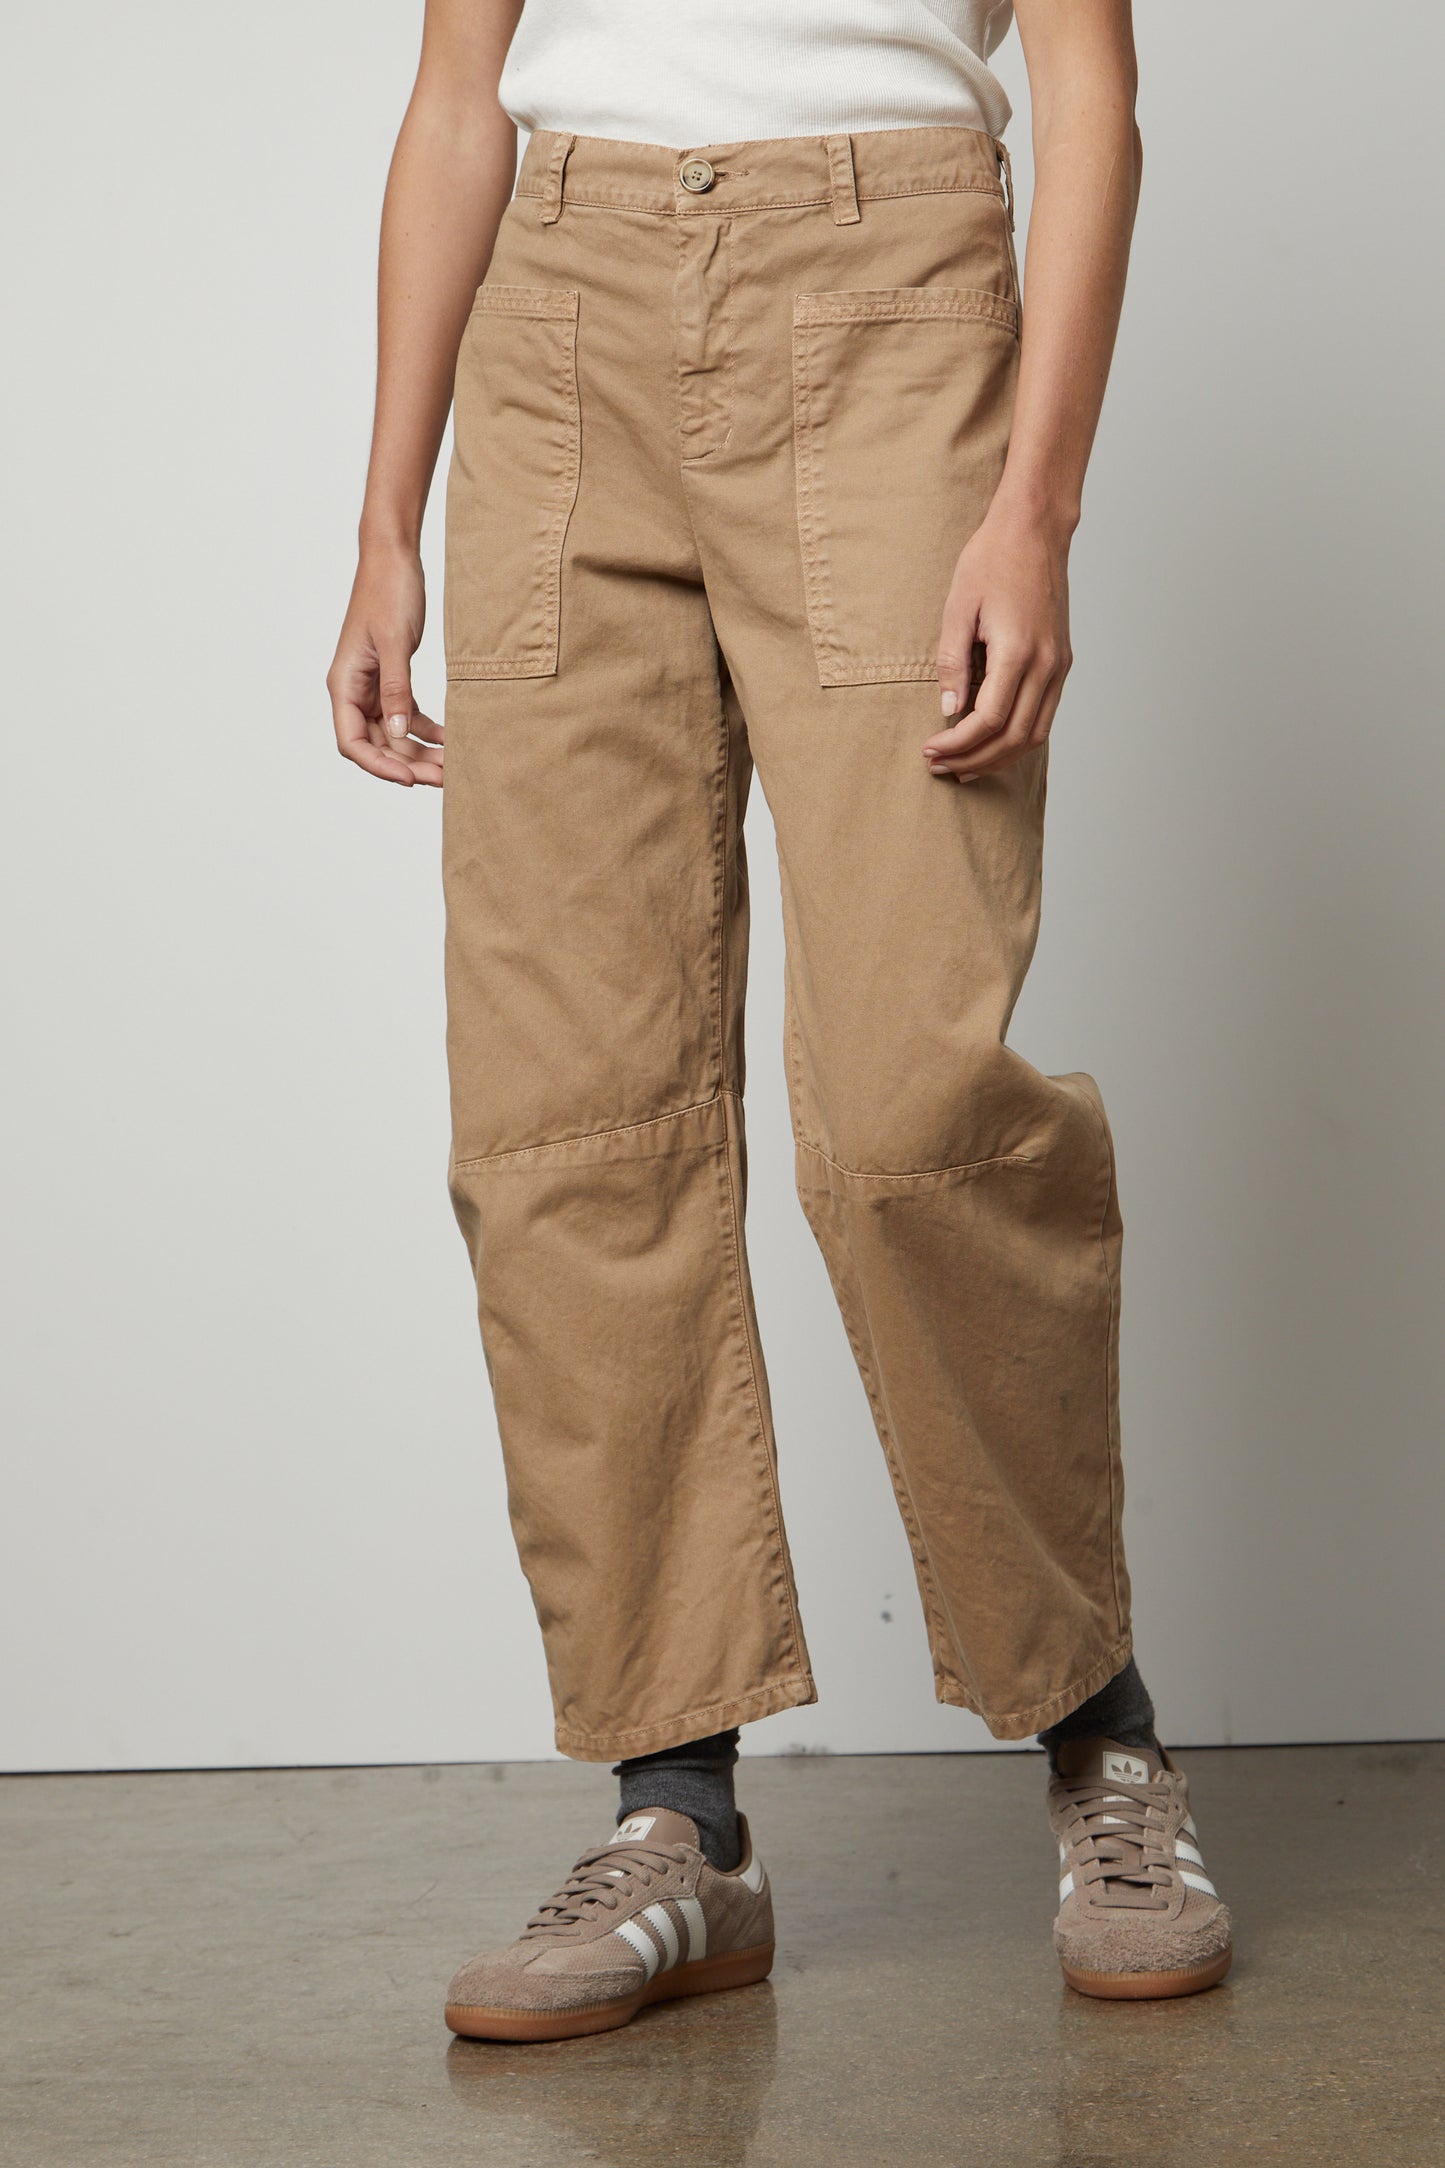 A woman wearing the Velvet by Graham & Spencer BRYLIE SANDED TWILL UTILITY PANT and white t-shirt.-26884103897281